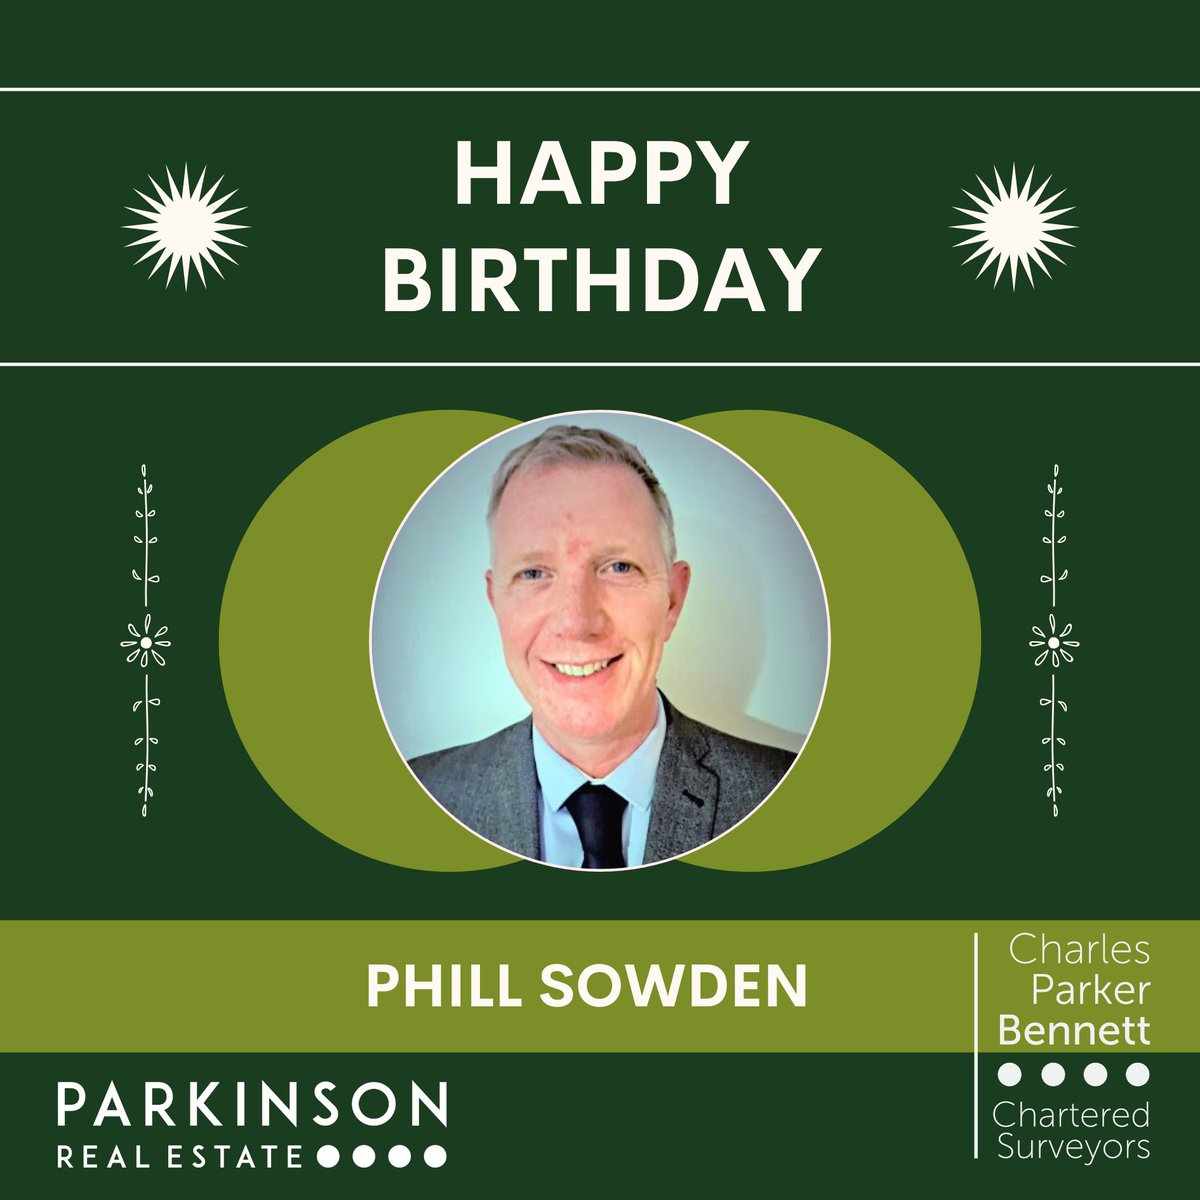 The @CPBPreston and @ParkinsonRE teams would like to wish Phill Sowden a very happy birthday today! 

As with all employees, we have left him a little something to enjoy on his special day! 🍷🎂

#HappyBirthday #Celebration #CharlesParkerBennett #ParkinsonRealEstate